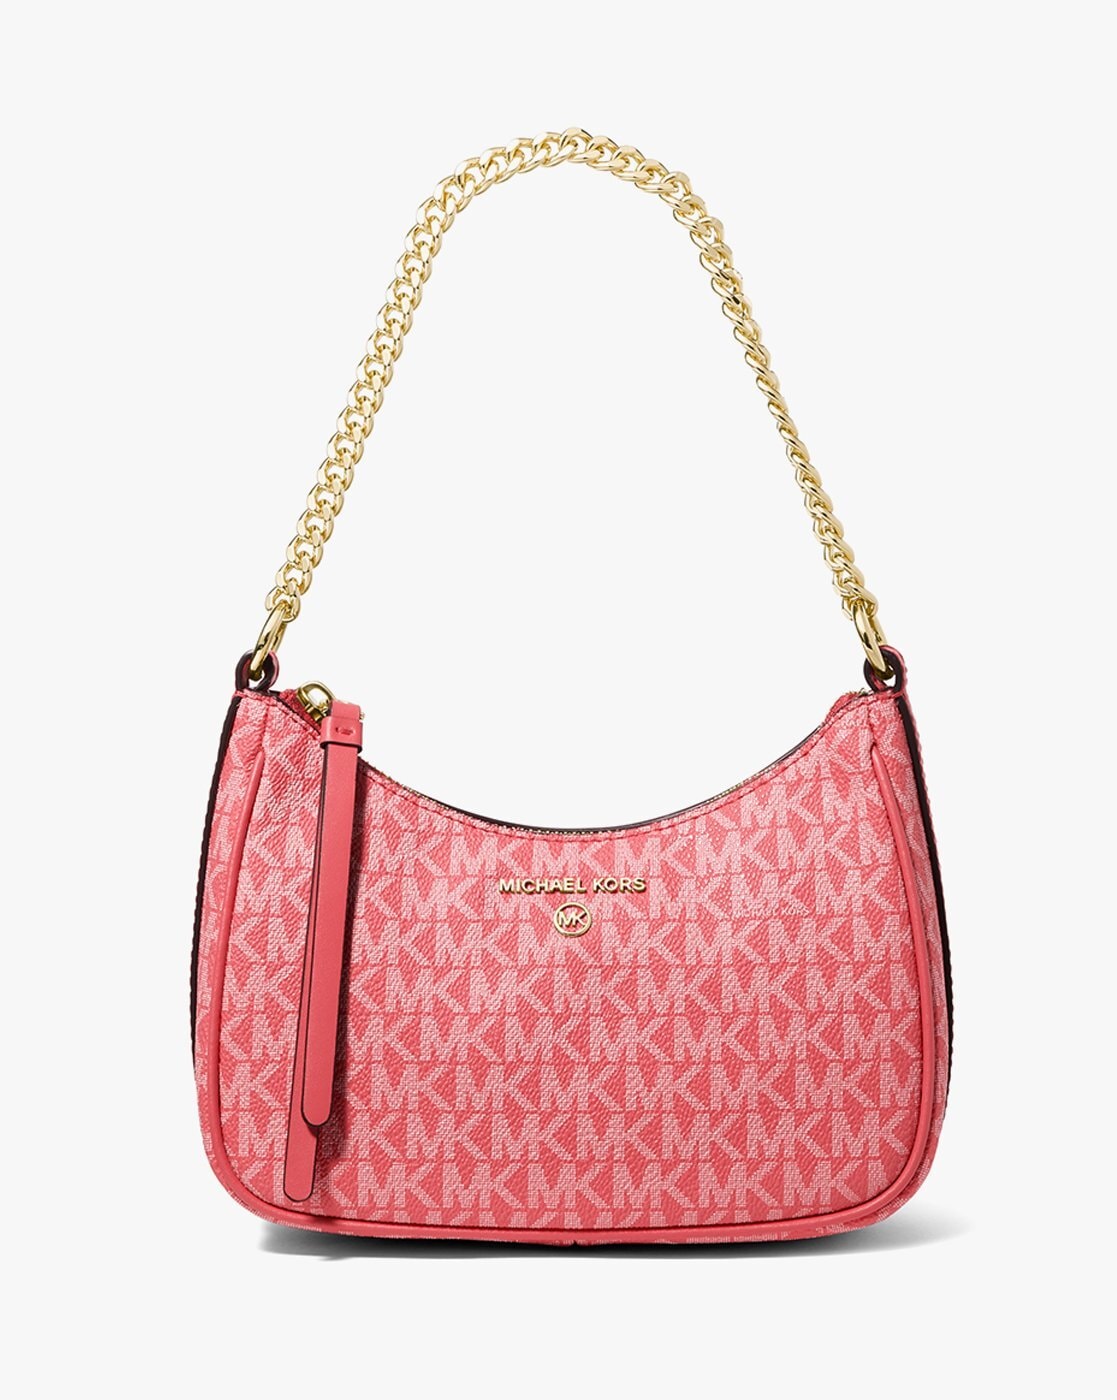 Michael Kors Pink Crossbody | Brand Vision | Faux leather bag